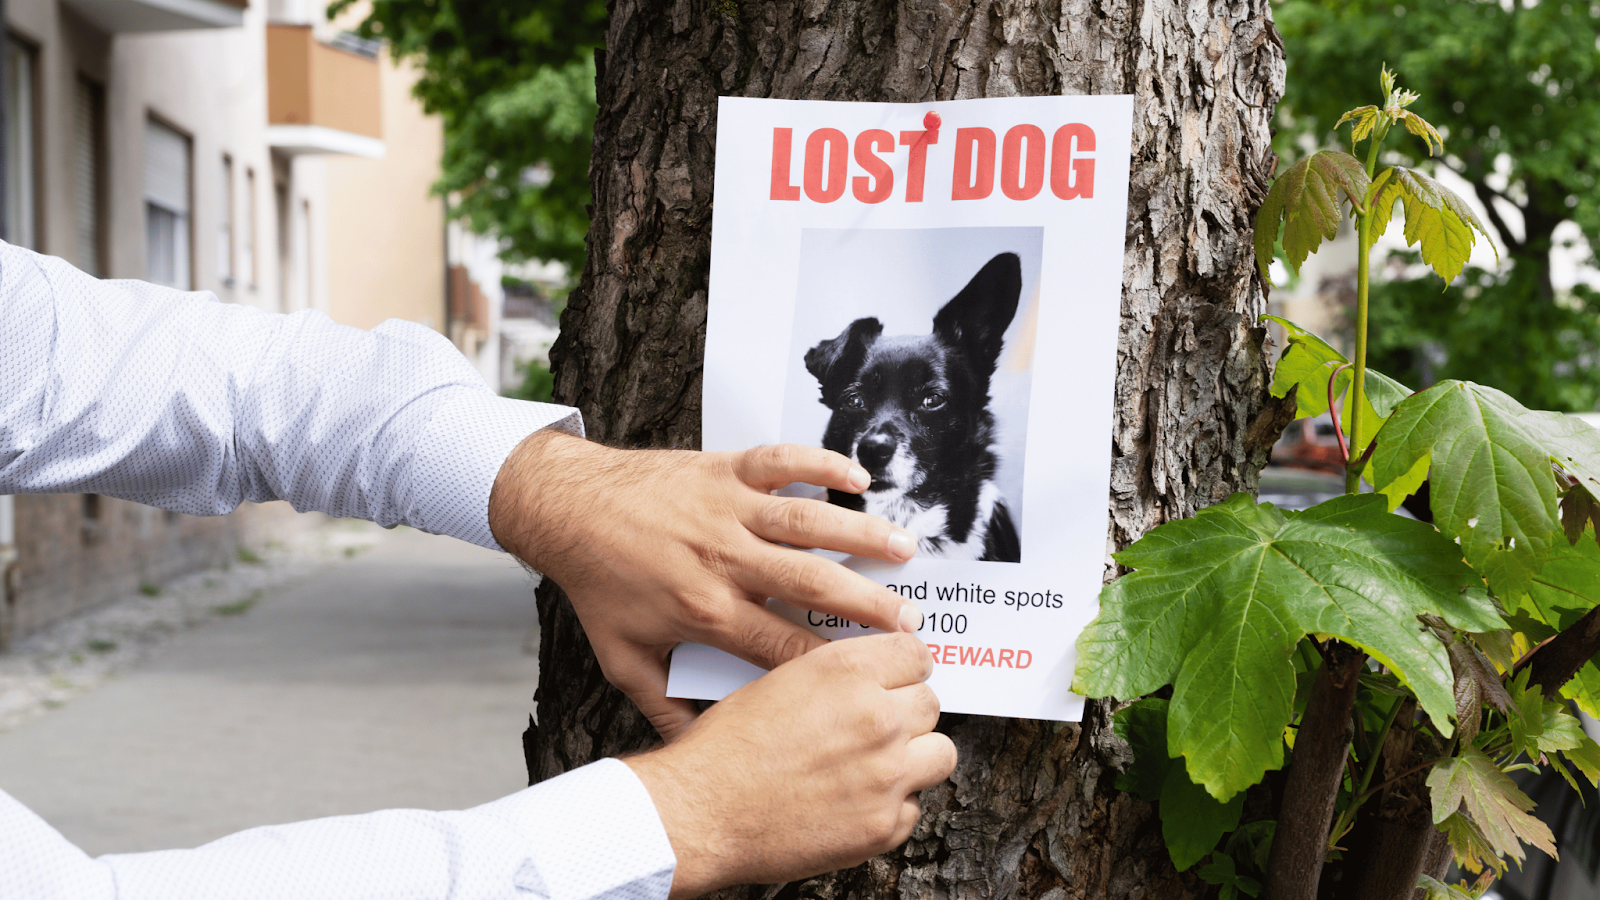 Human putting up flyer of lost dog in neighborhood to find owner